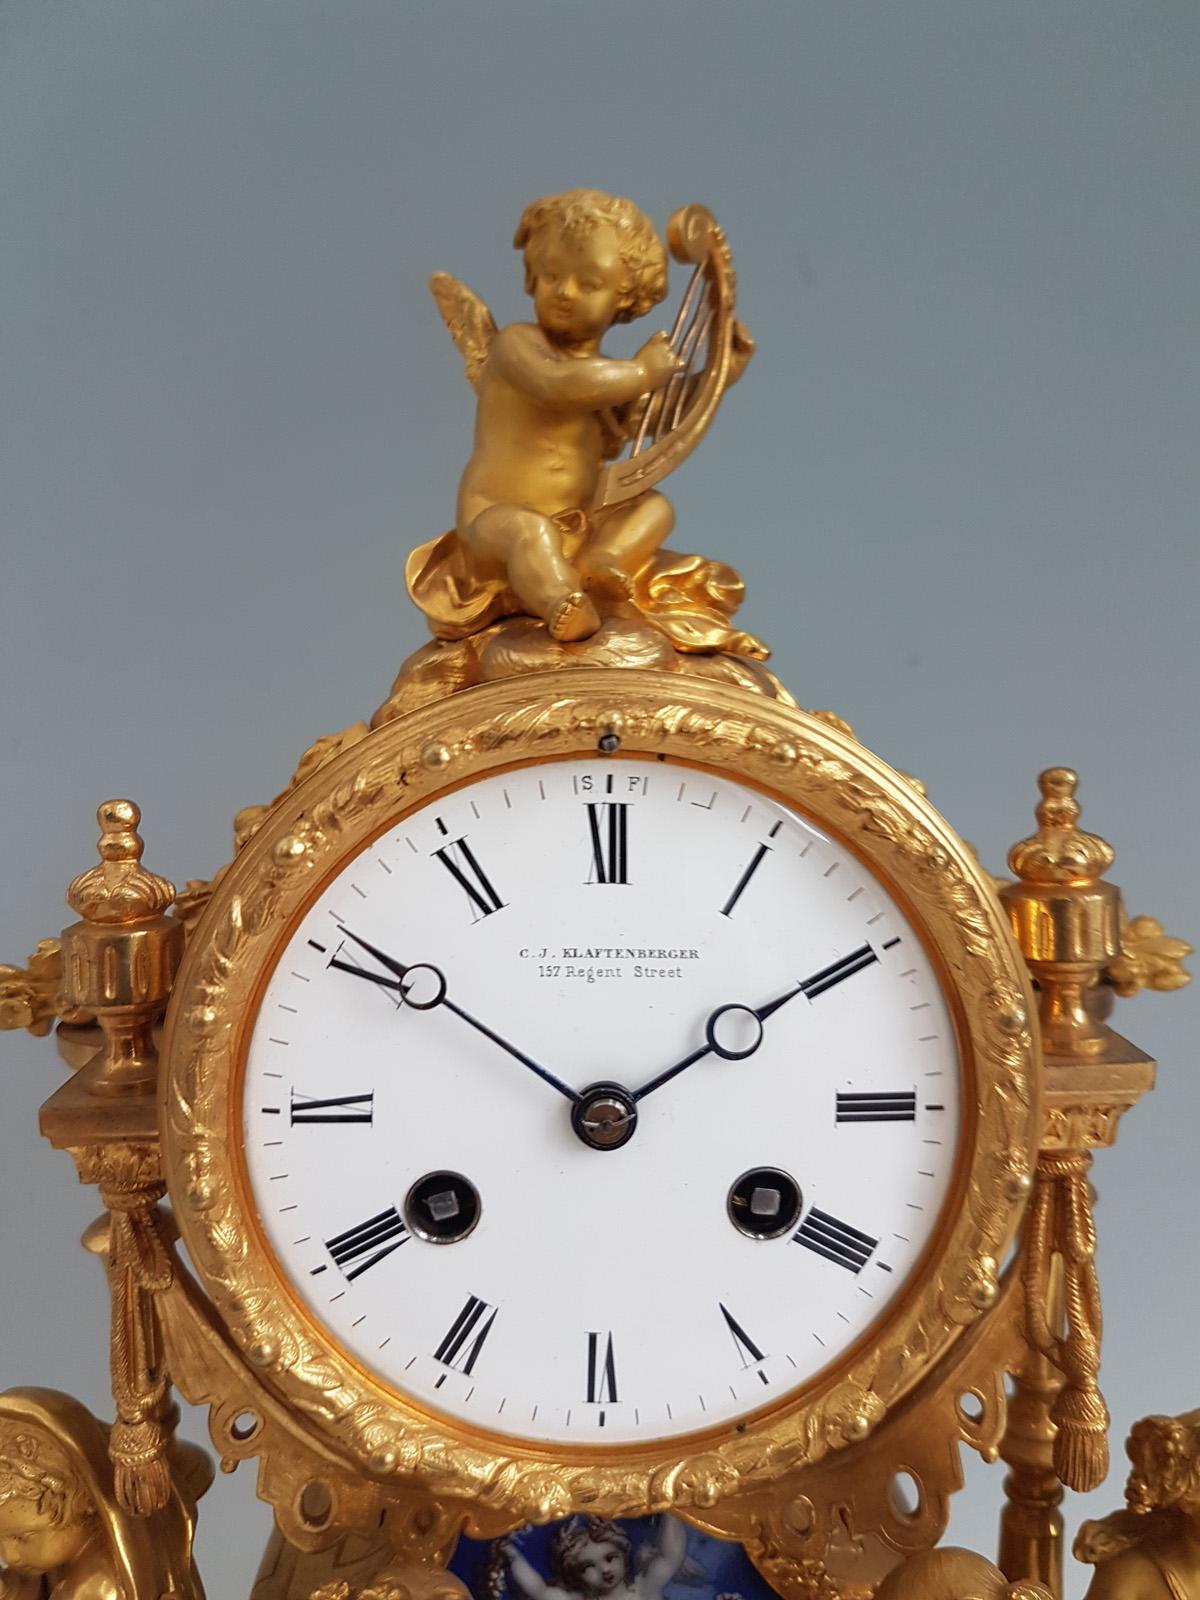 French ormolu and blue porcelain mantel clock. The blue porcelain with blue ground and decorated with baskets of flowers, fruit and doves, cherubs. A clock of the very highest quality, a beautiful example of the best of mid-19th century